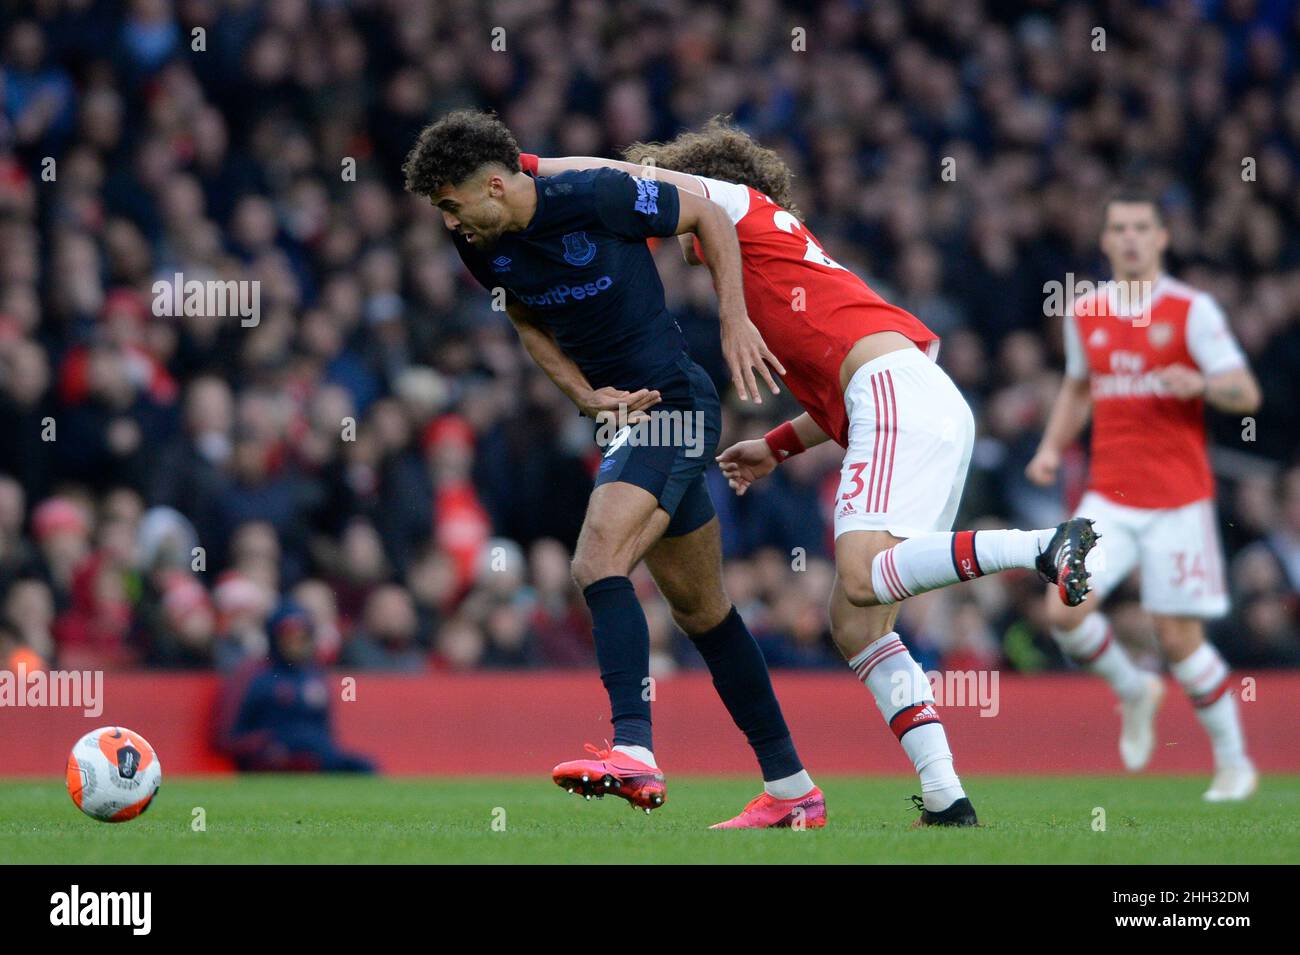 David Luiz of Arsenal and Dominic Calvert-Lewin of Everton in action during the Premier League match between Arsenal and Everton at the Emirates Stadium in London, UK - 16th February 2020 Stock Photo